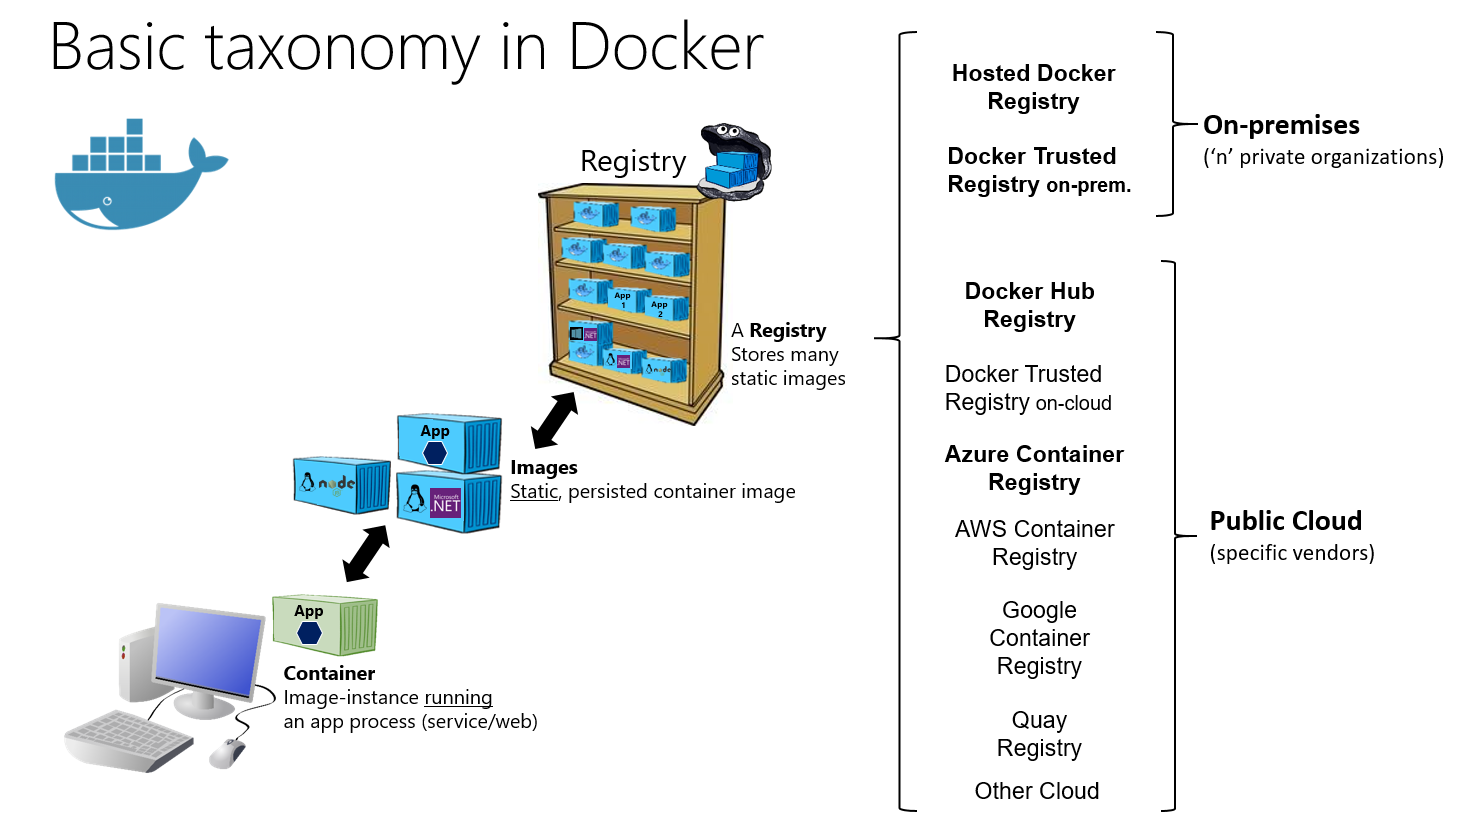 Basic Docker taxonomy infographic for containers, images, and registries